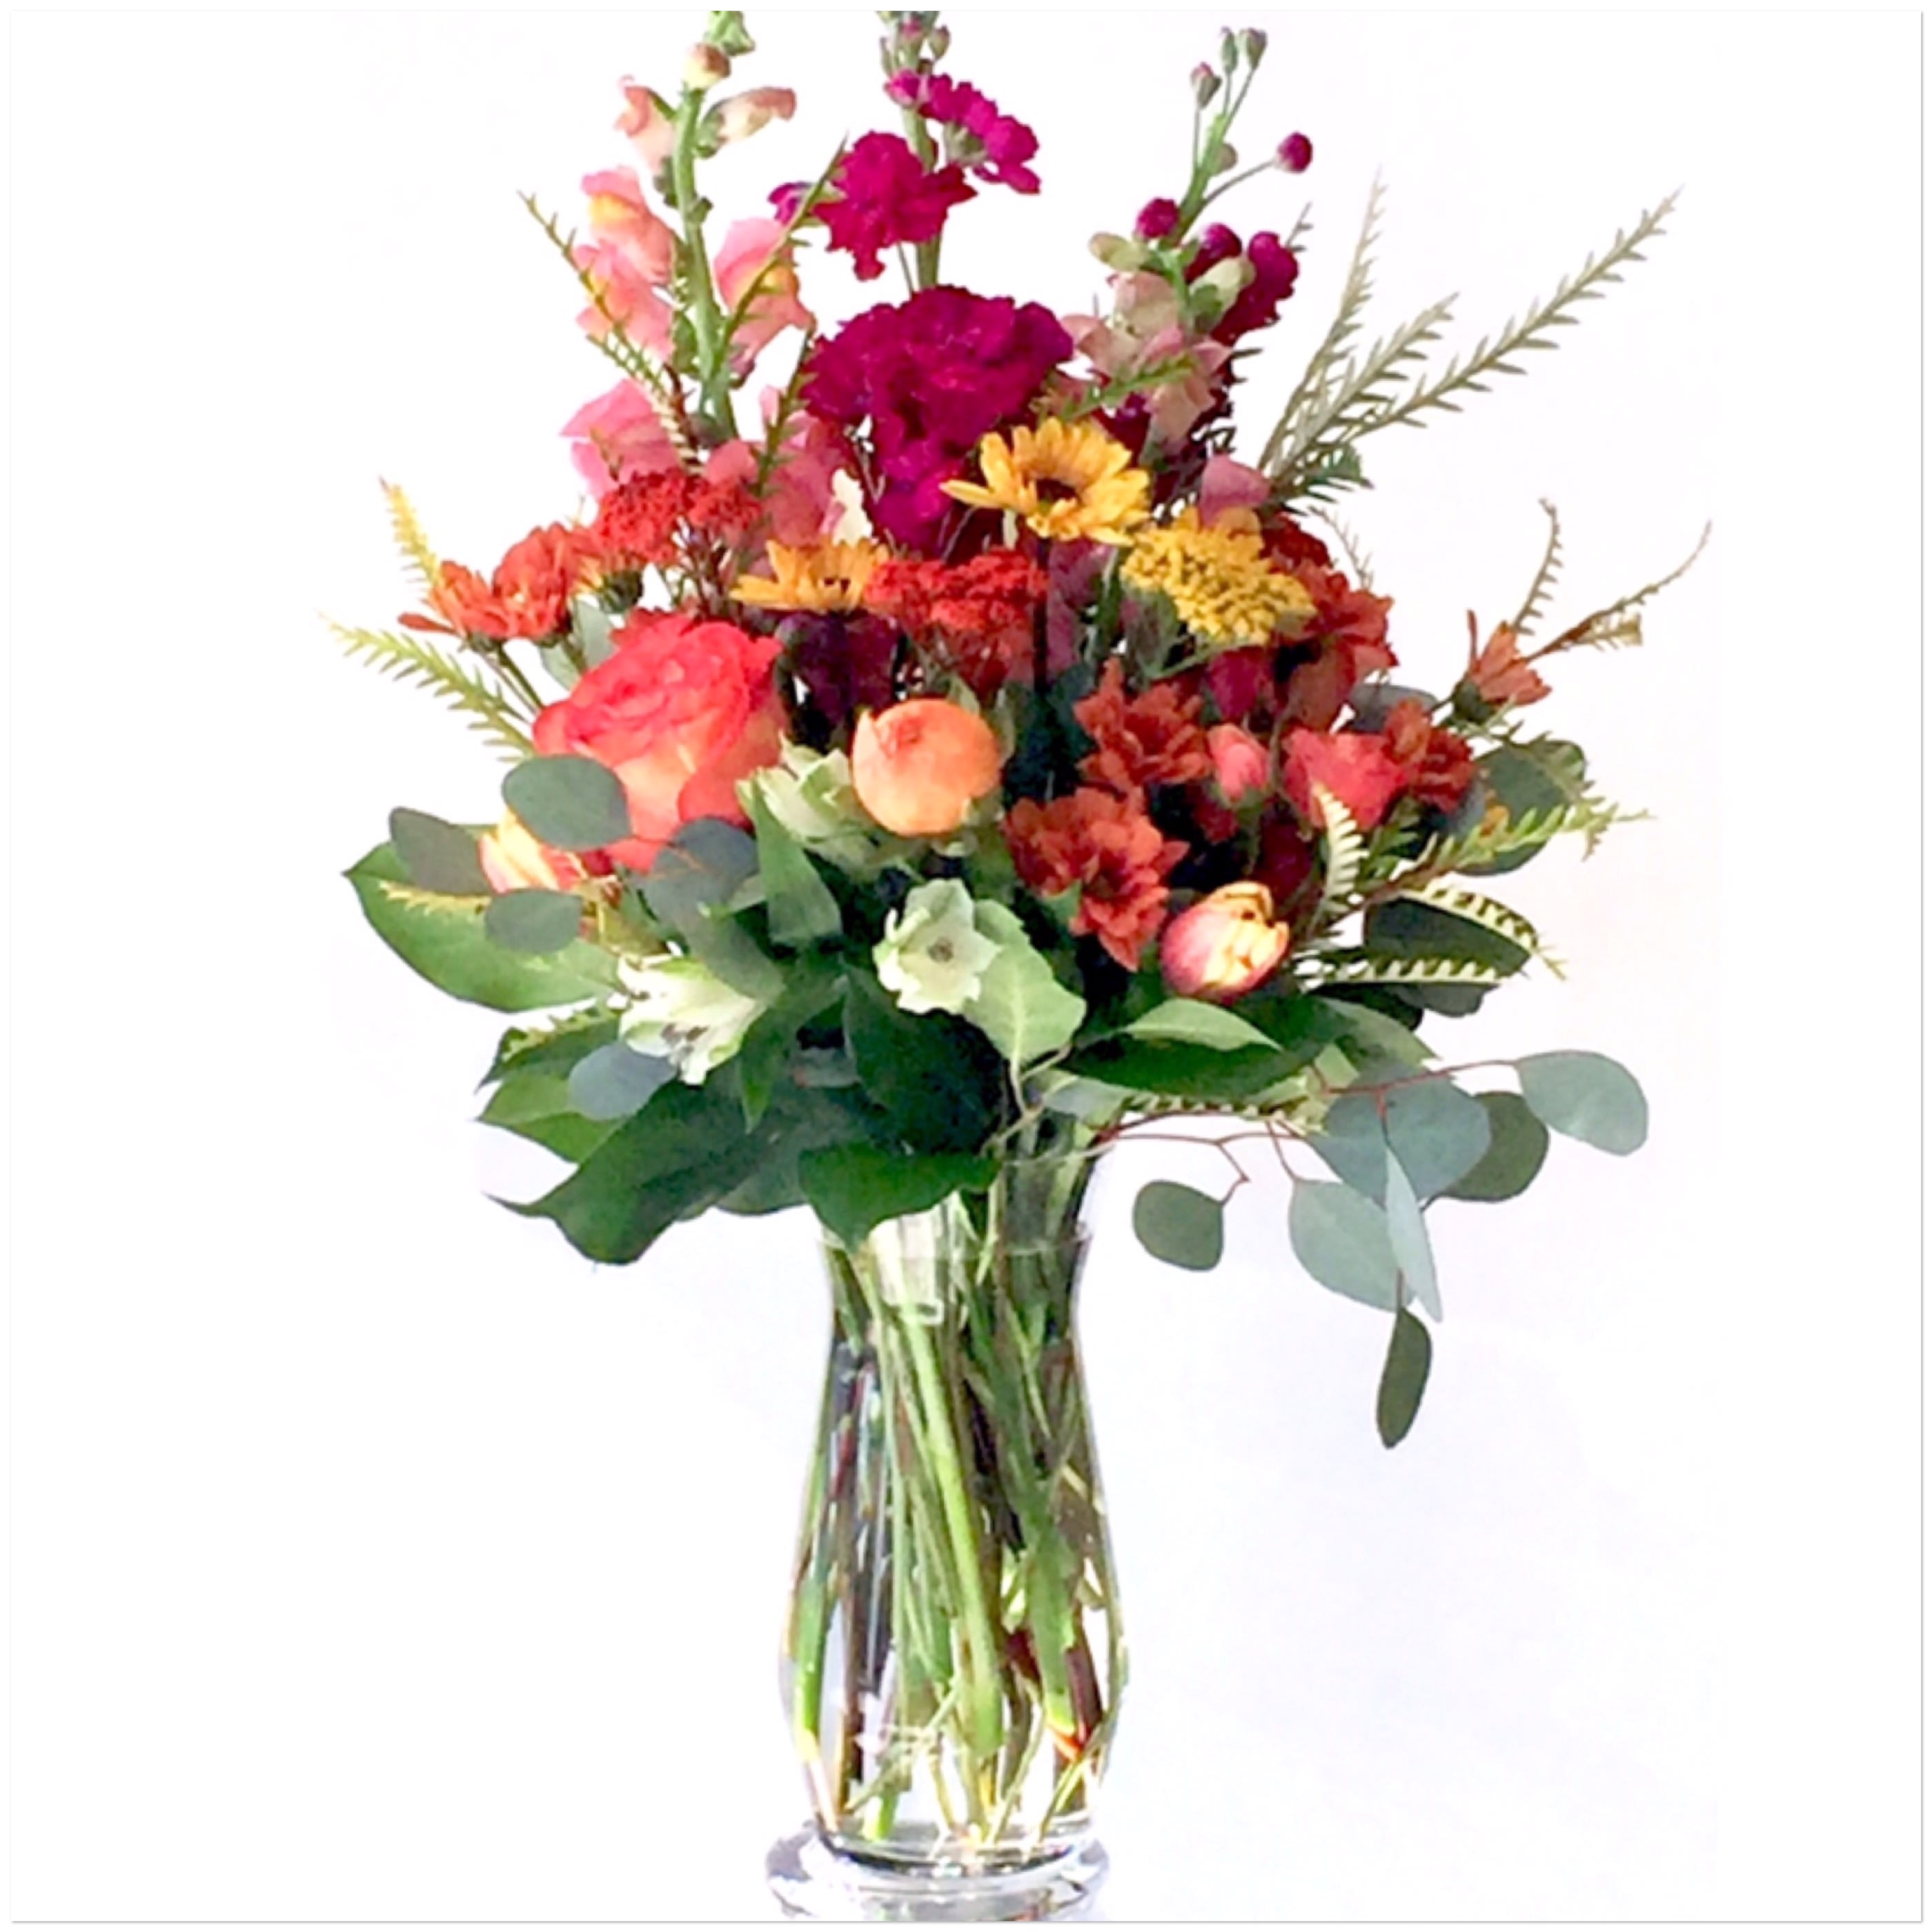 Sedona Sunset - This bouquet includes a bold and abundant assortment of premium garden blooms that are perfectly arranged for the season.  